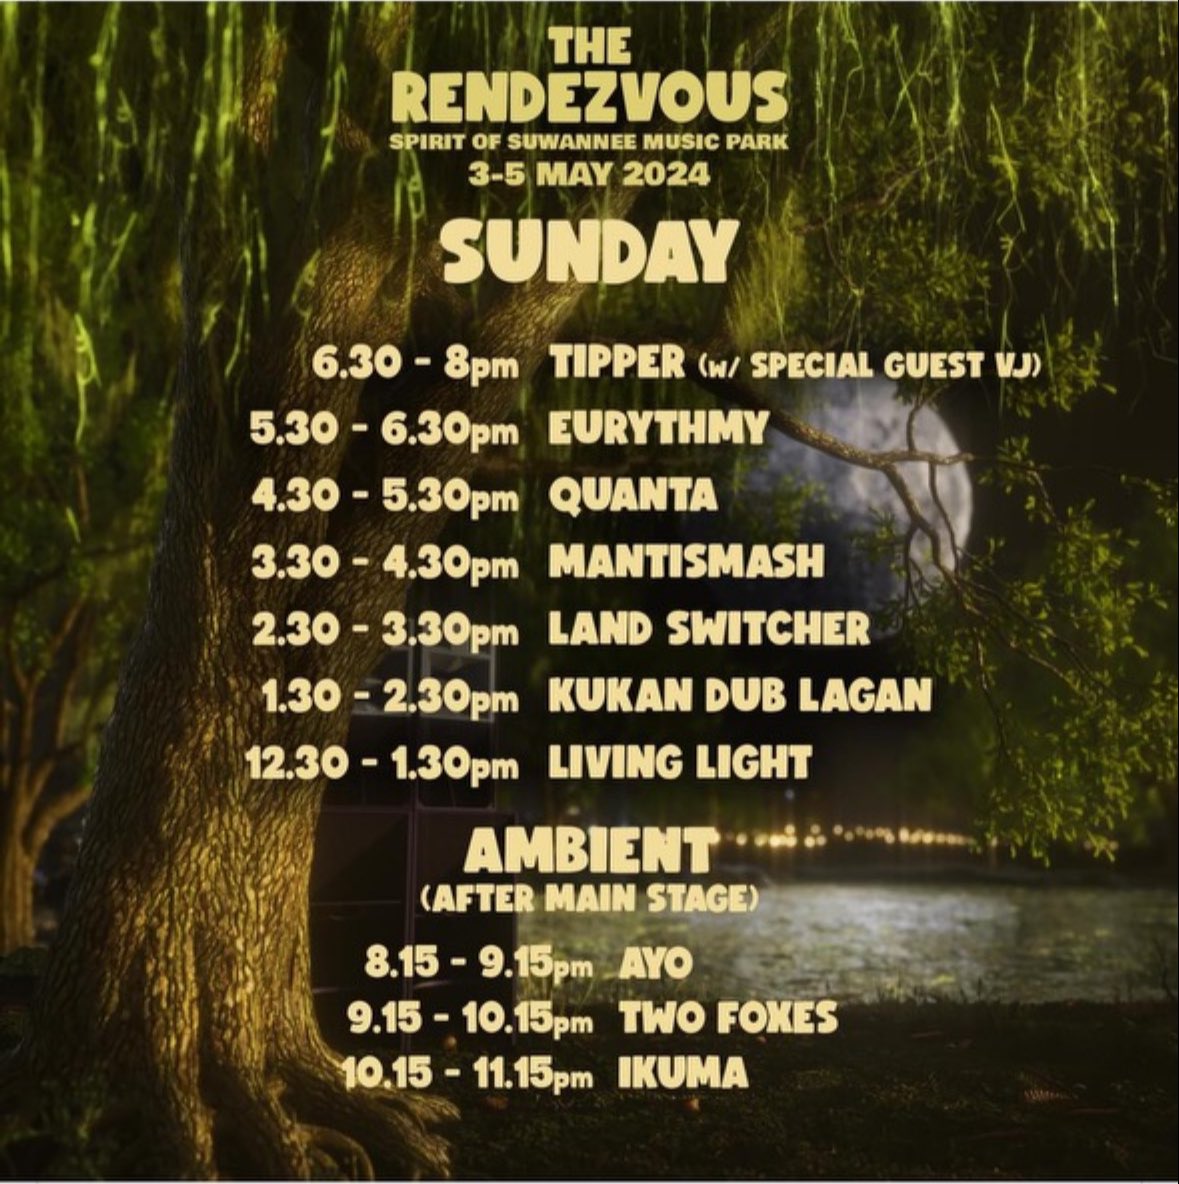 This psy Sunday is gonna be insane. Have heard some whispers of potential tipper psydub also im calling it that it will be Tenorless on VJ duties for tipper. We are balling out so hard for this my friends we need to all gather together and line dance